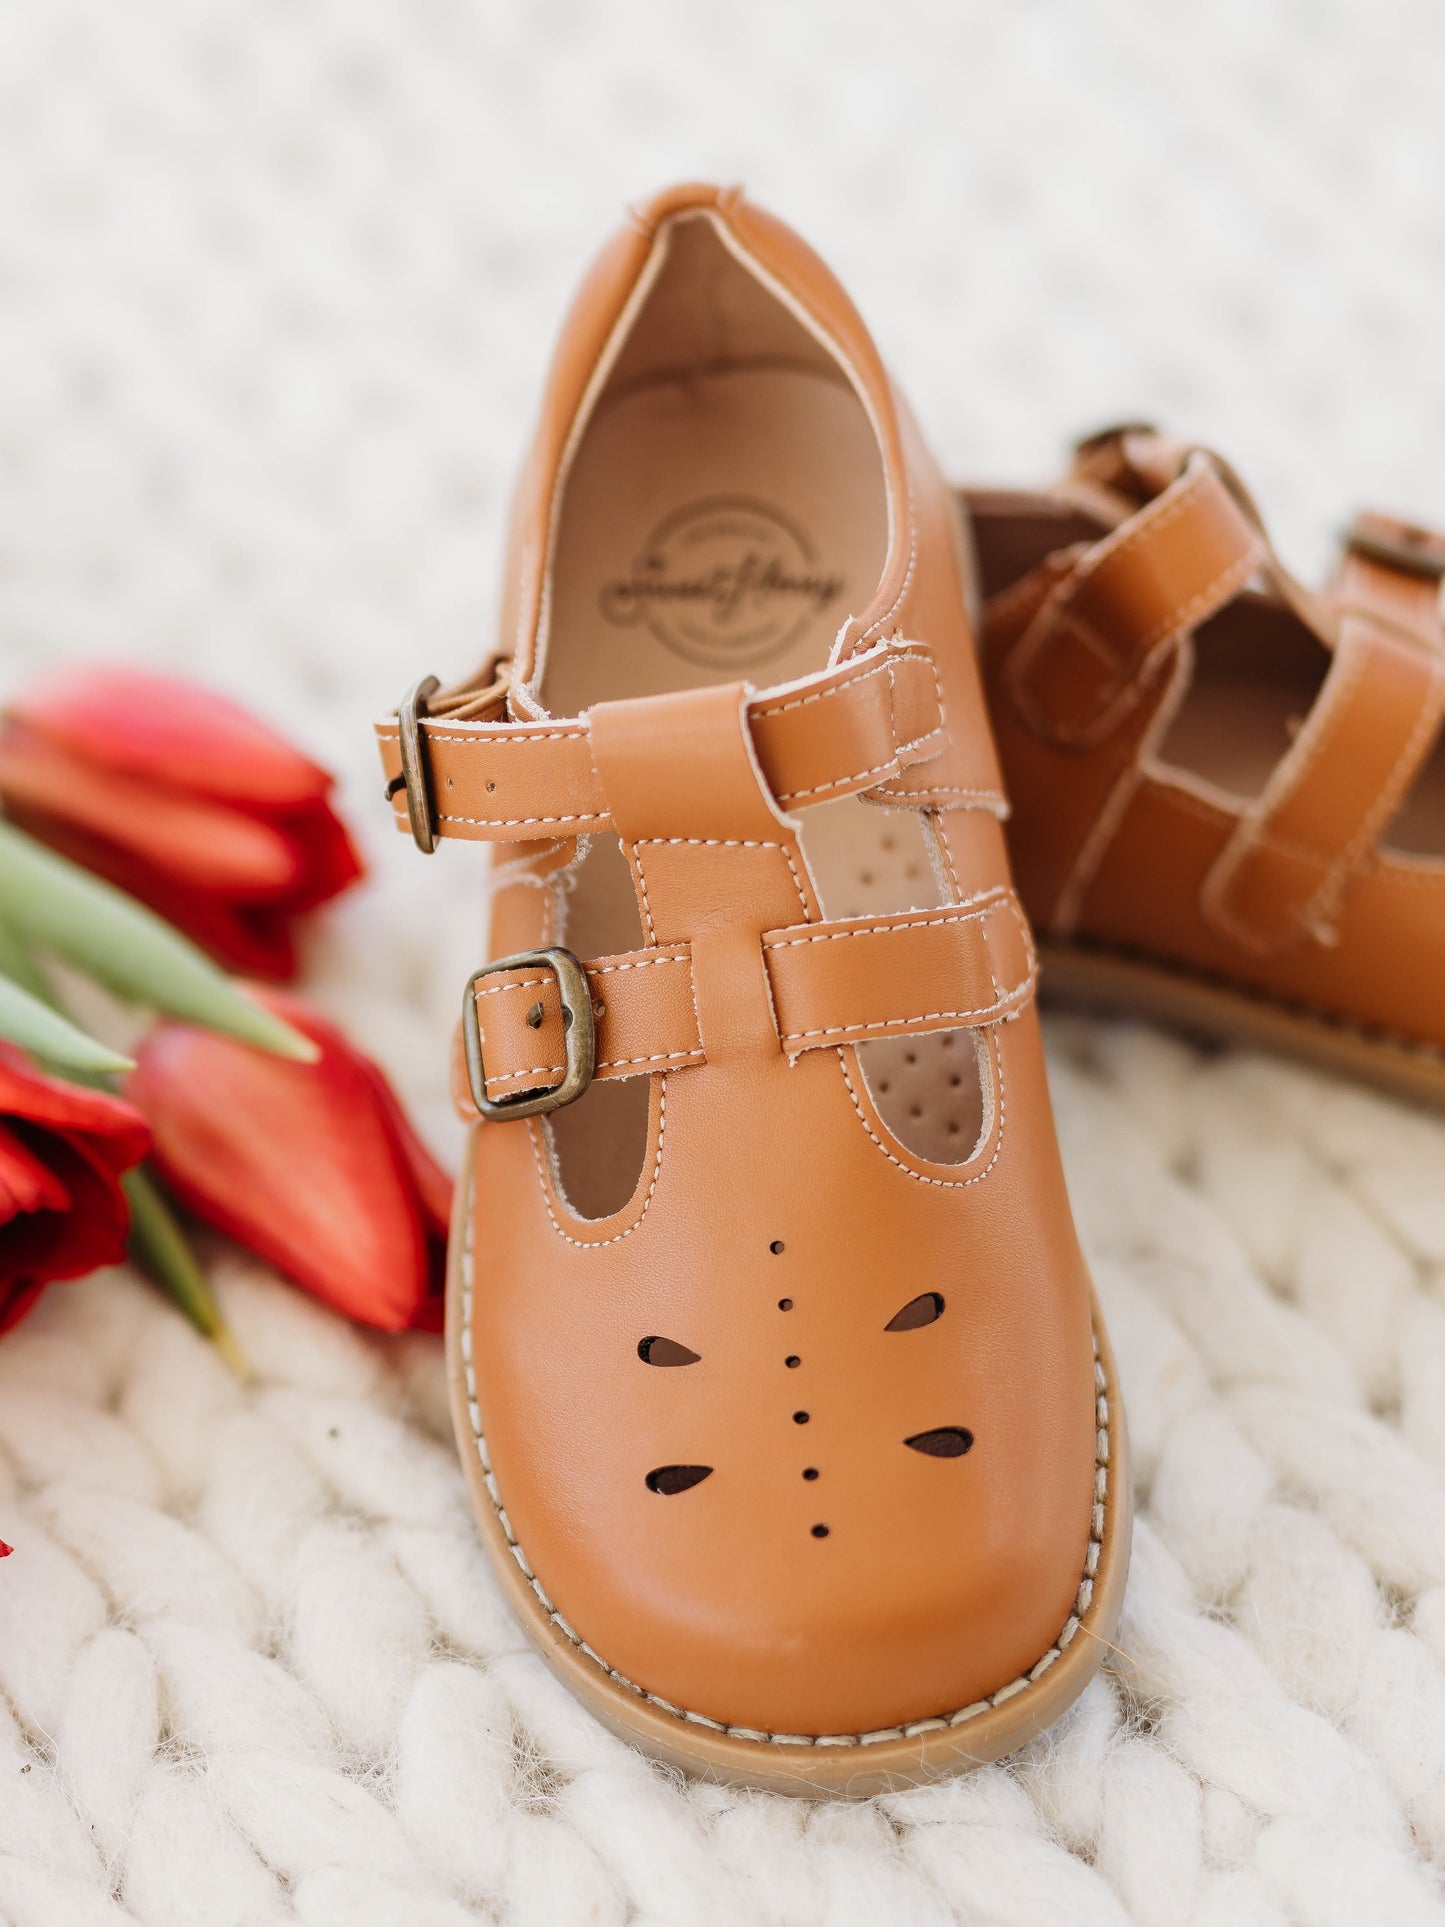 A pair of camel colored genuine leather rubber soled shoes with two adjustable metal buckles and ventilation holes across the toe area in a dragonfly type pattern. 